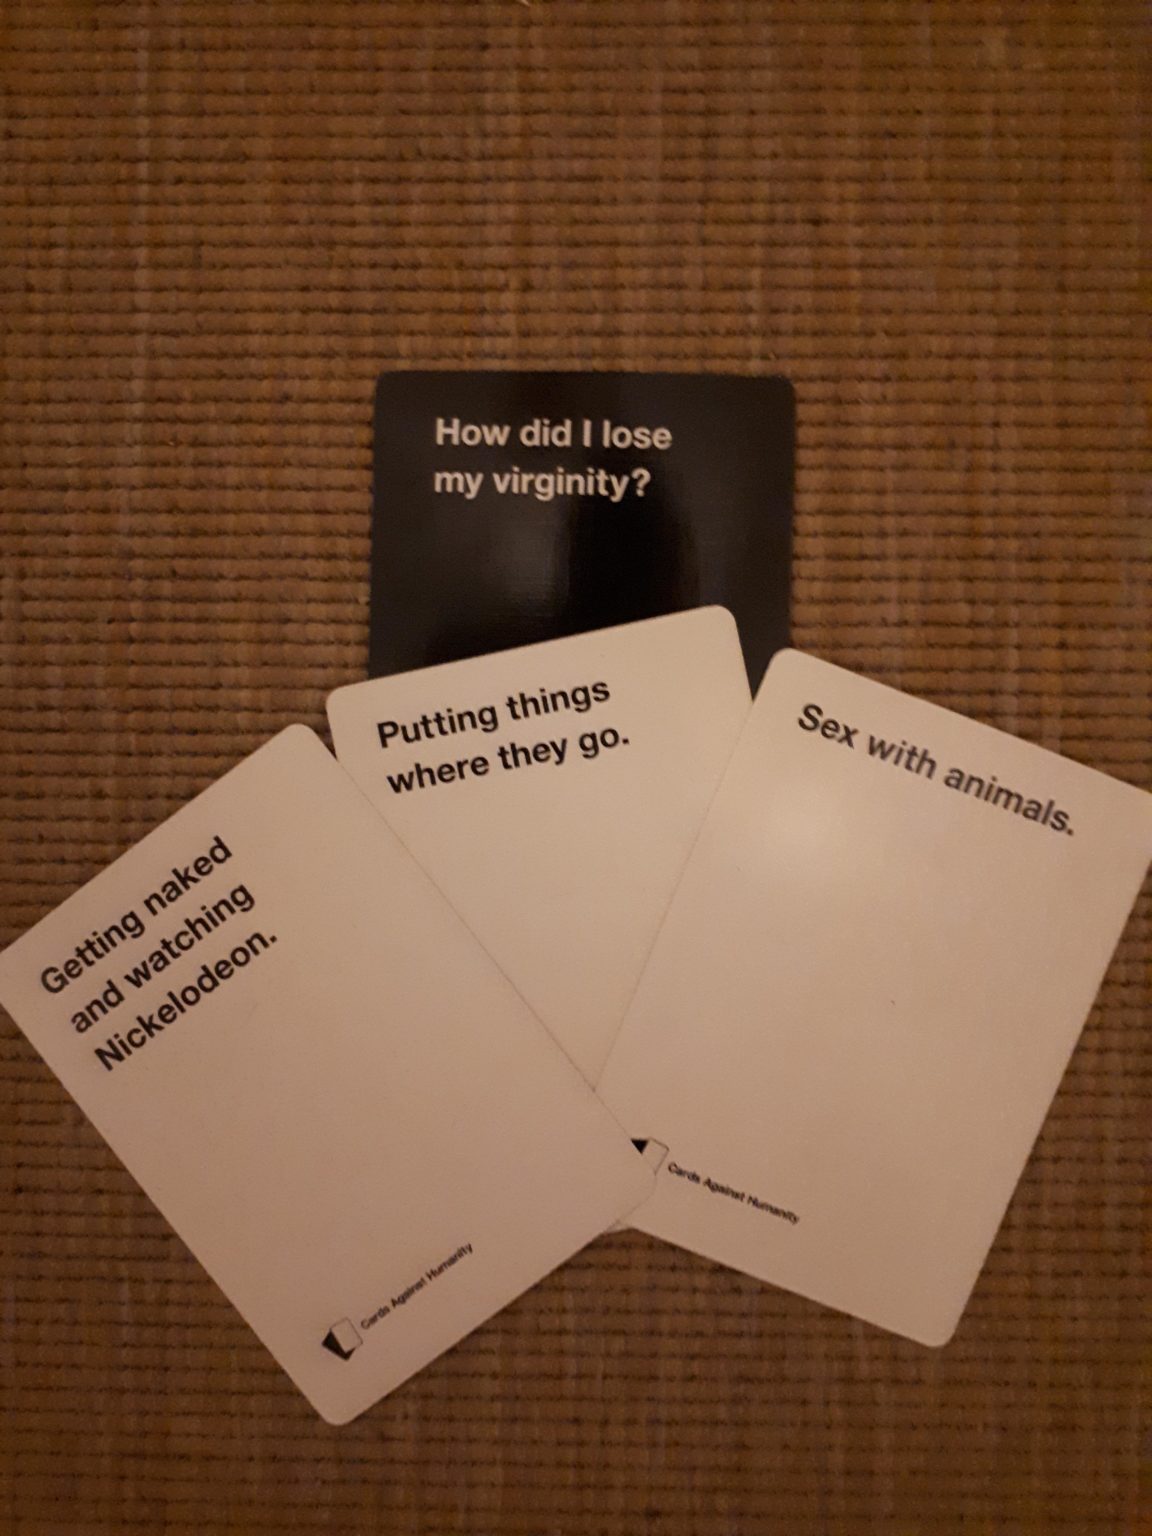 head trip game cards against humanity